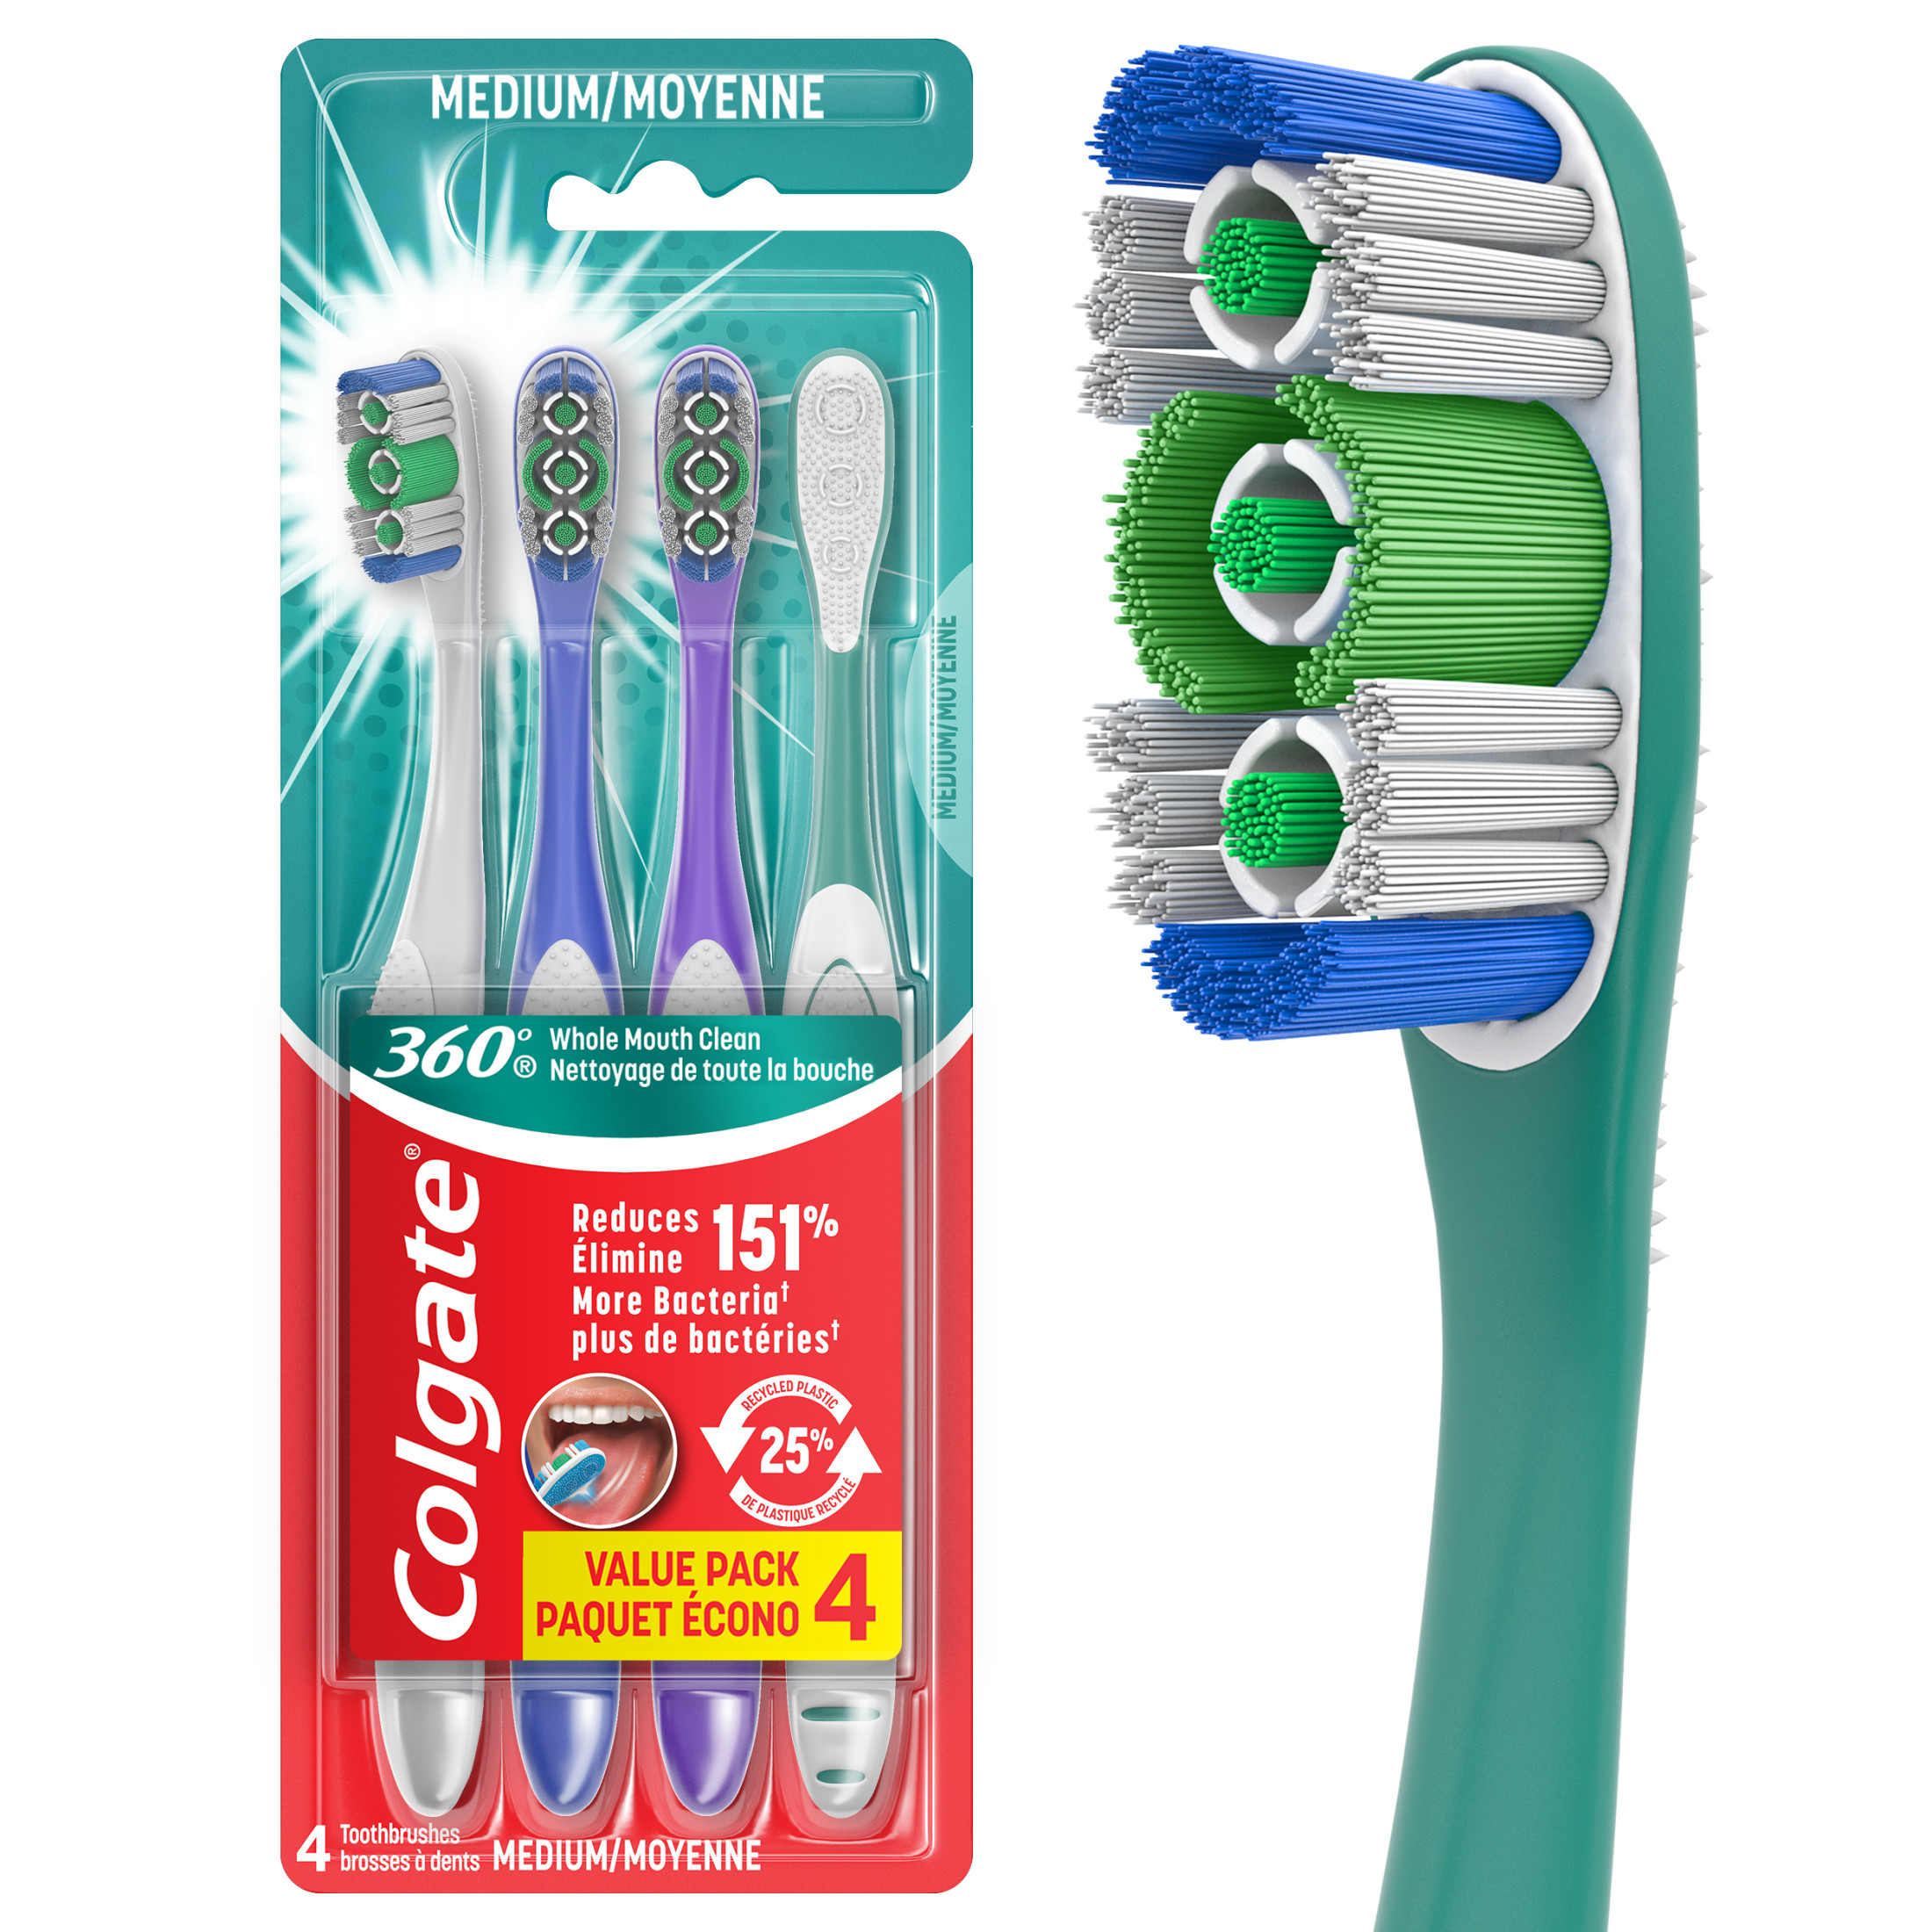 Colgate 360 Whole Mouth Clean Medium Toothbrush, Adult Toothbrush, 4 Pack - image 1 of 14